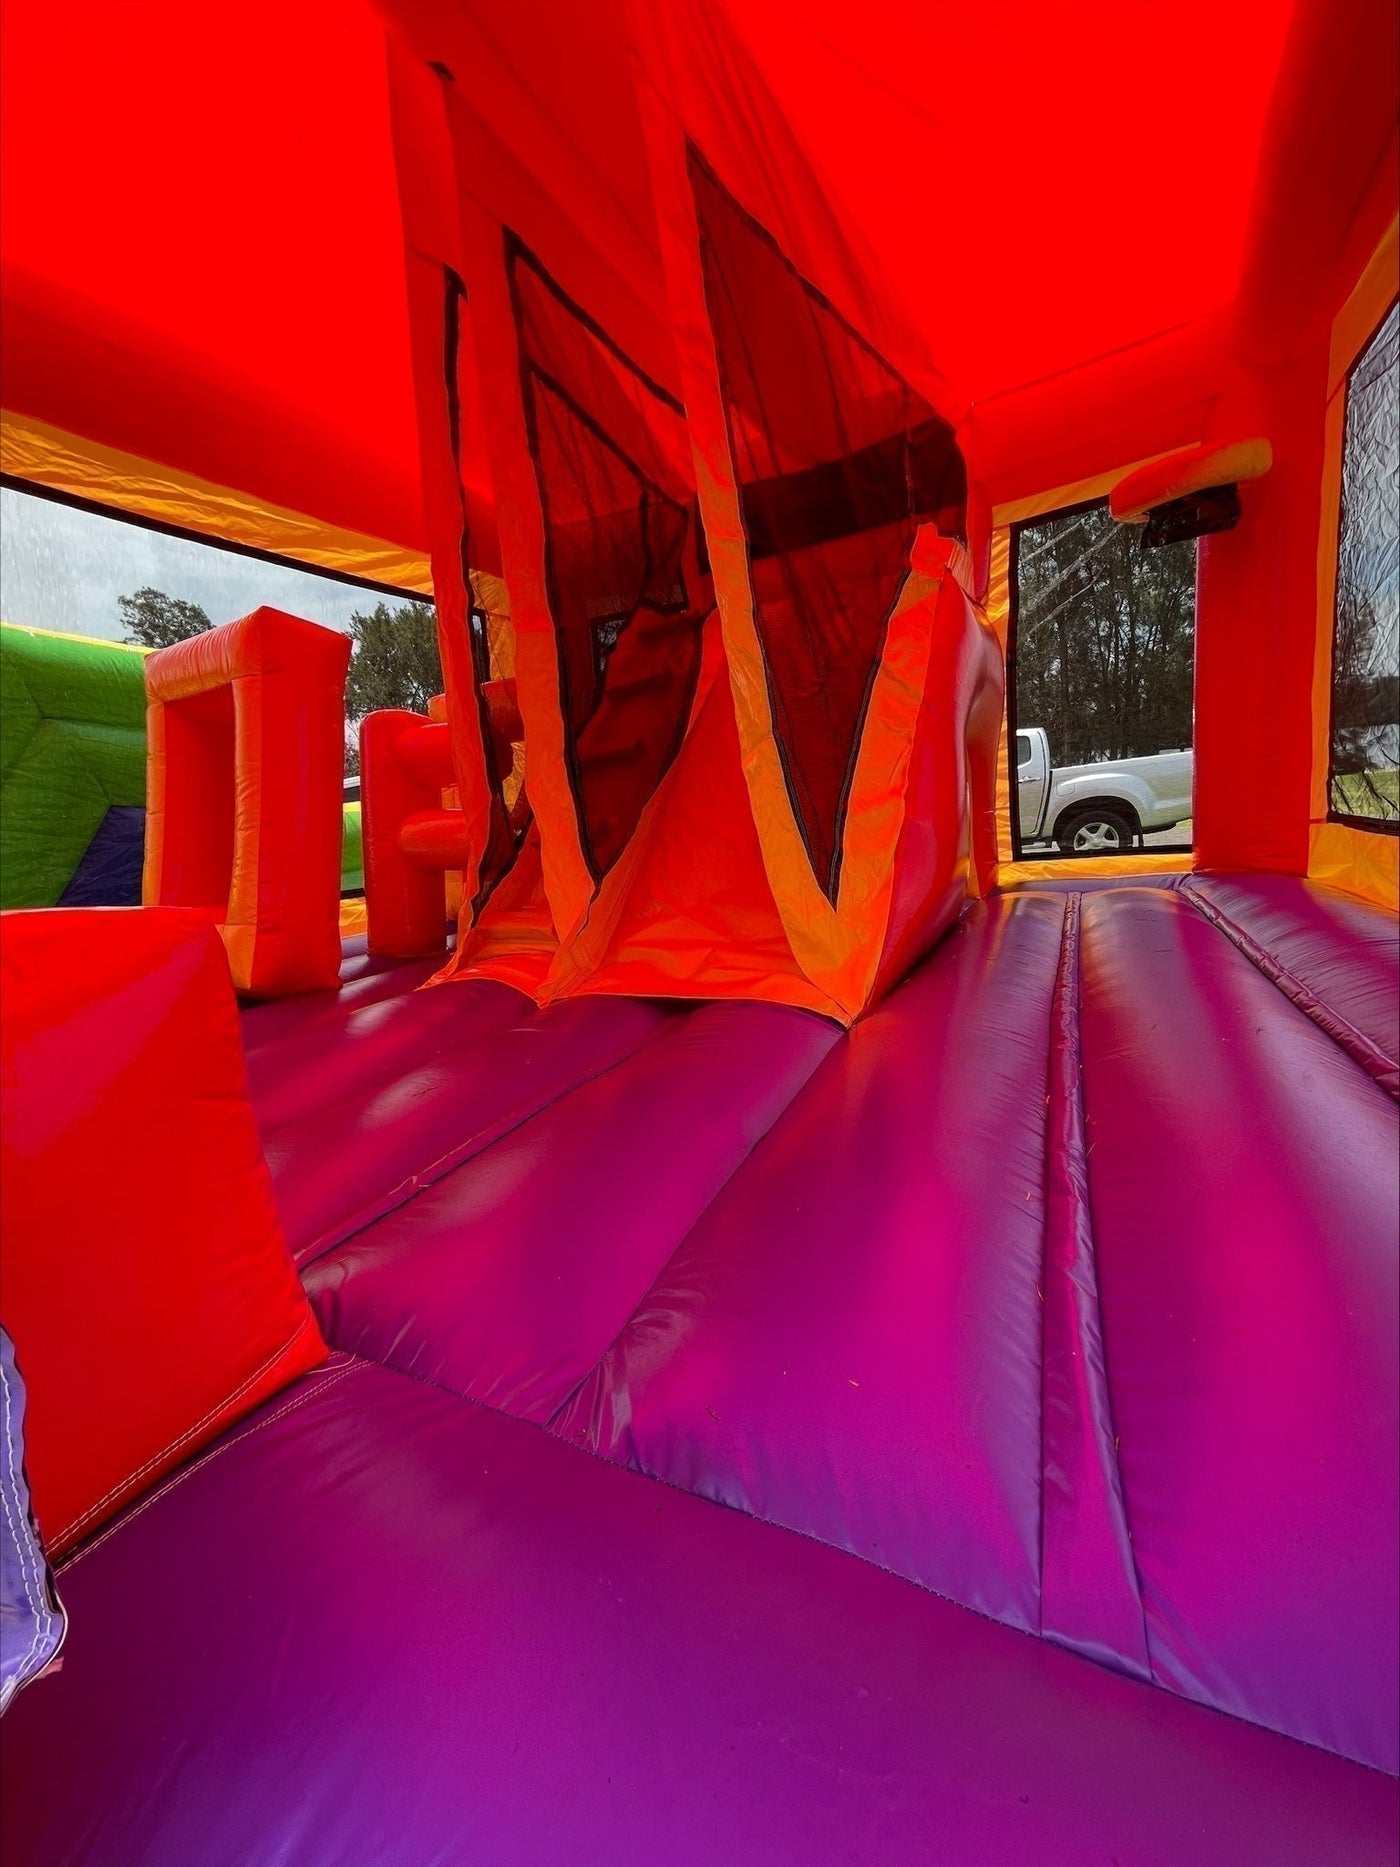 Christmas #5 Extra Large Obstacle Combo Jumping Castle